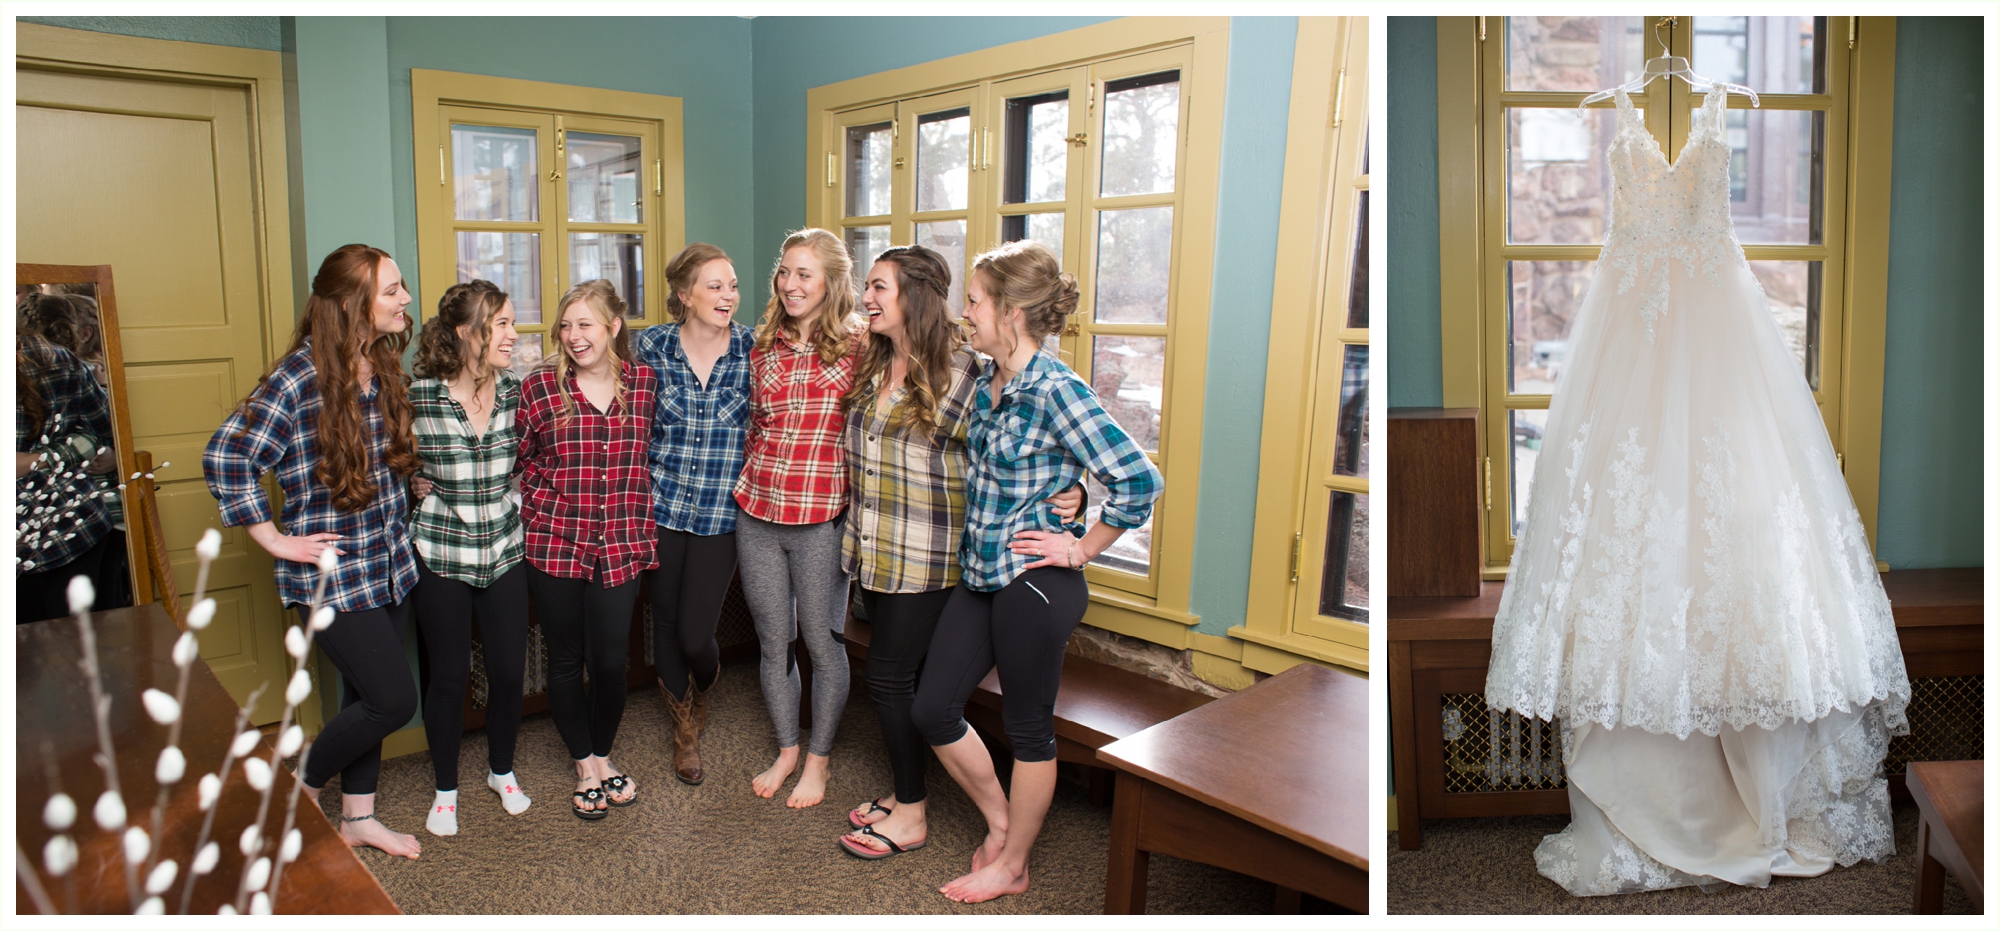 bridesmaids wearing matching flannels during getting ready at Boettcher mansion wedding in golden colorado. colorado mountain wedding photographer captures natural candid moments